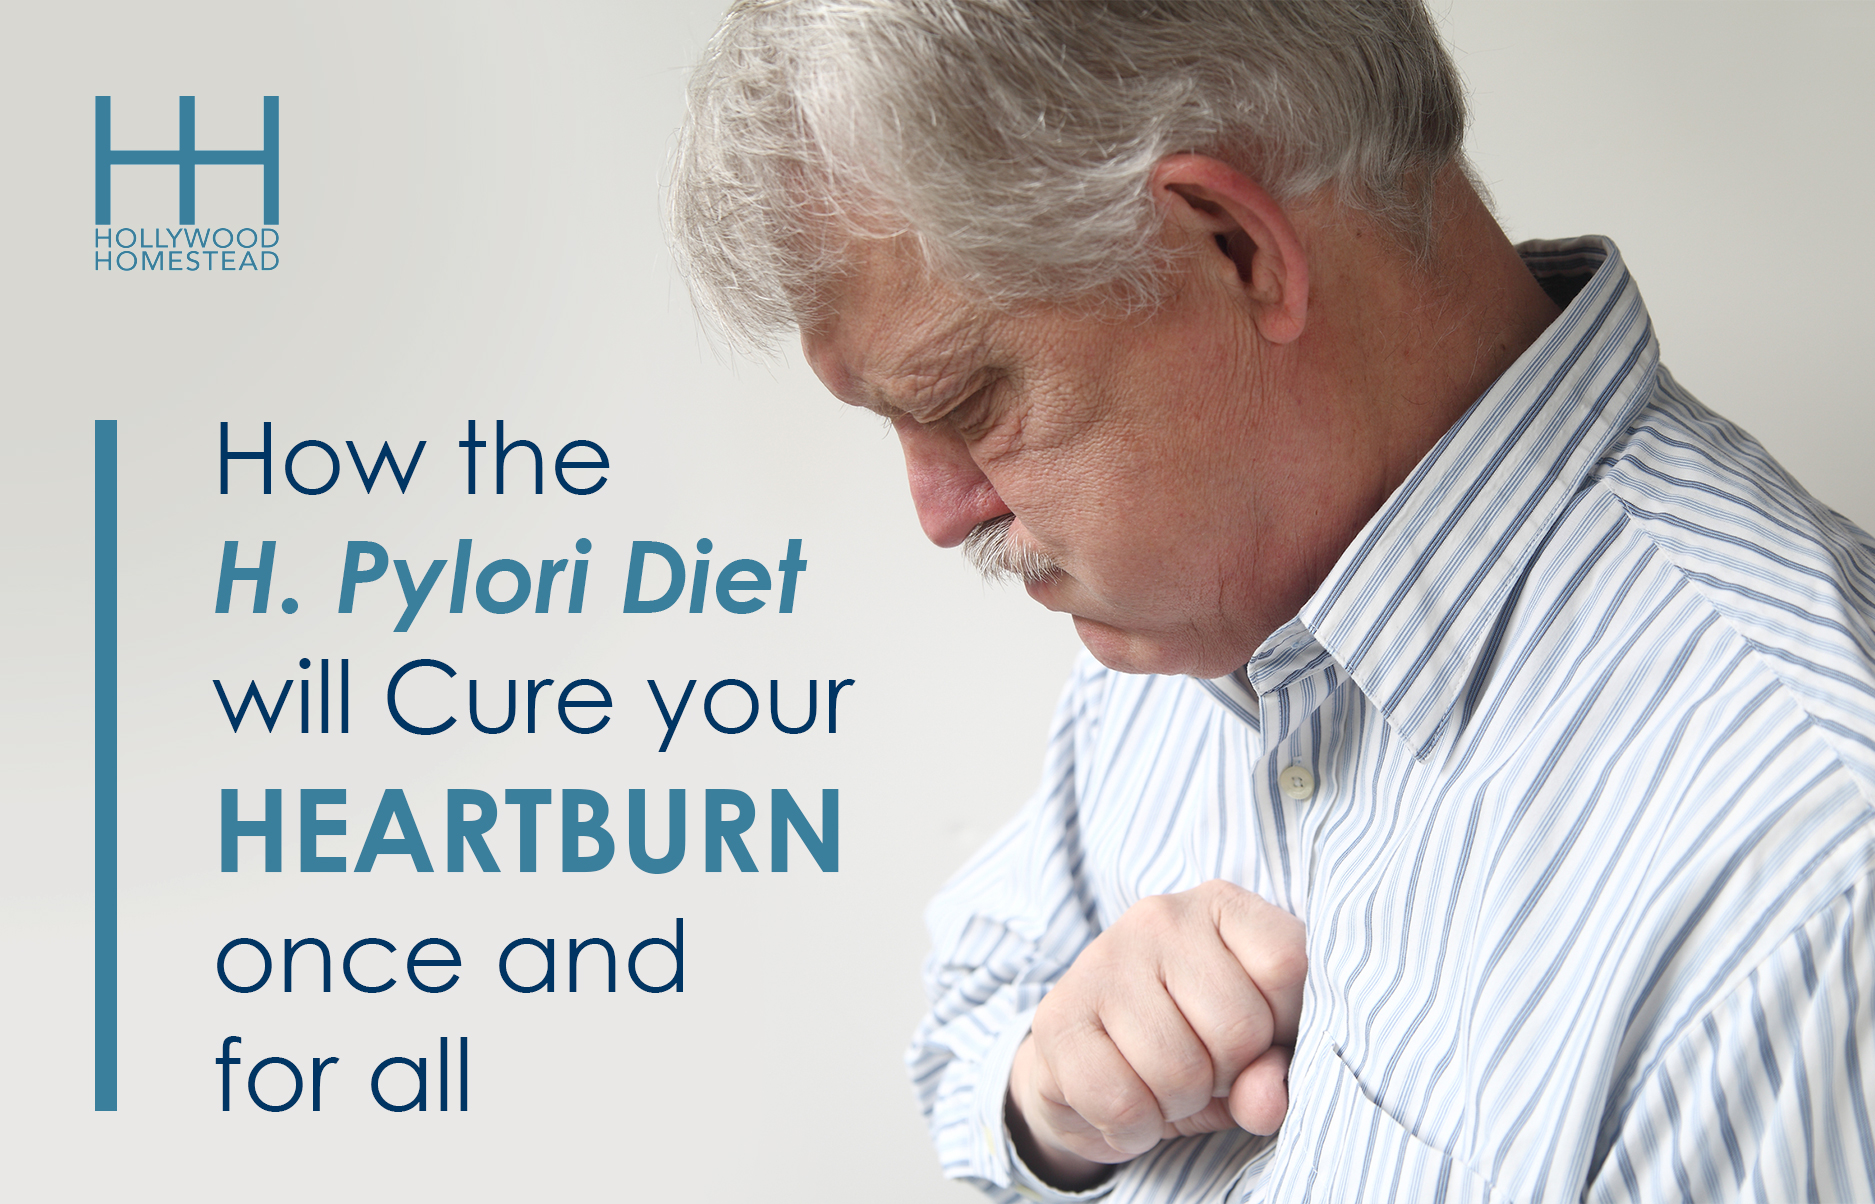 How-the-H.-Pylori-Diet-will-Cure-your-Heartburn-once-and-for-all.jpg